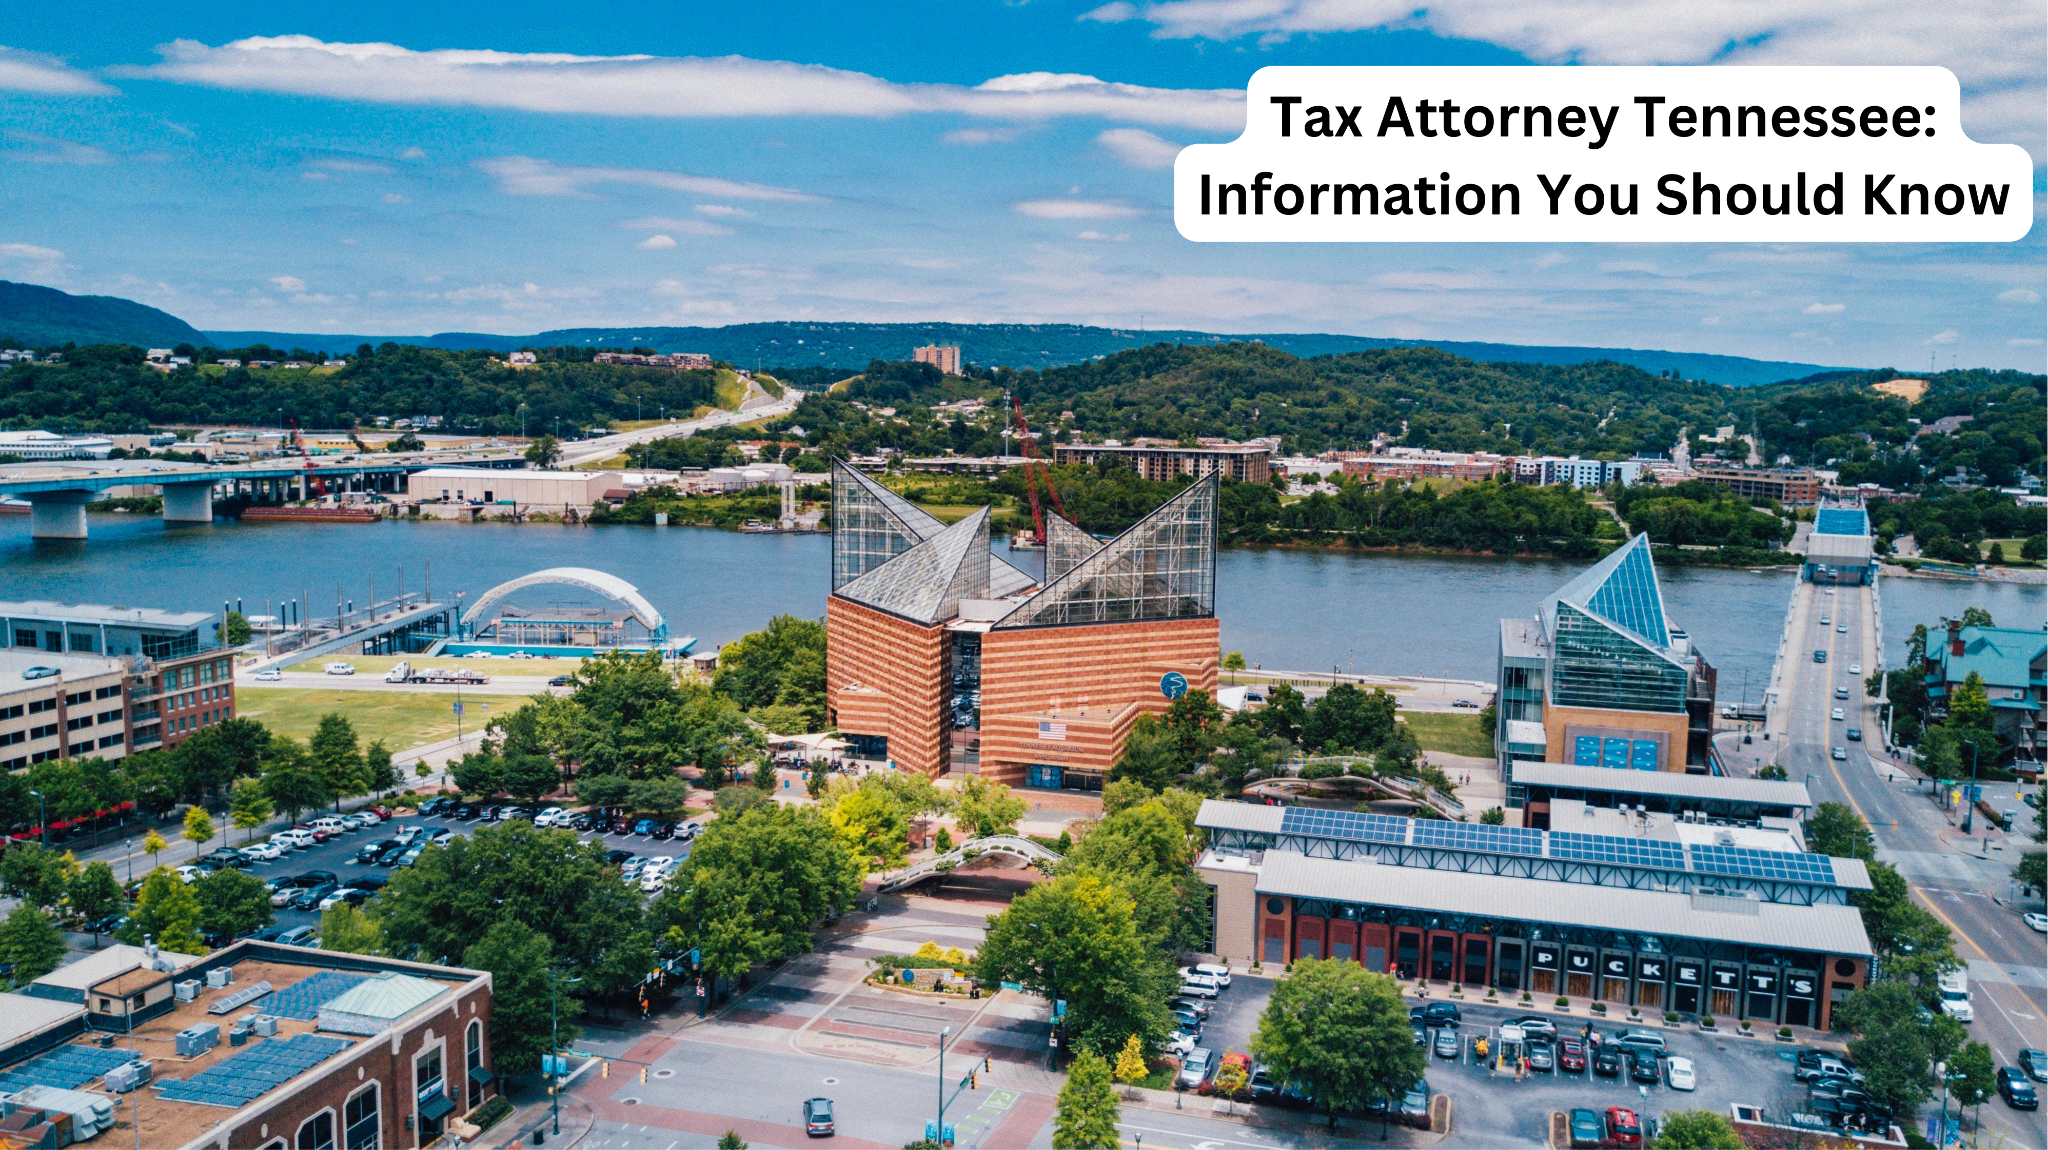 Tax Attorney Tennessee: Information You Should Know